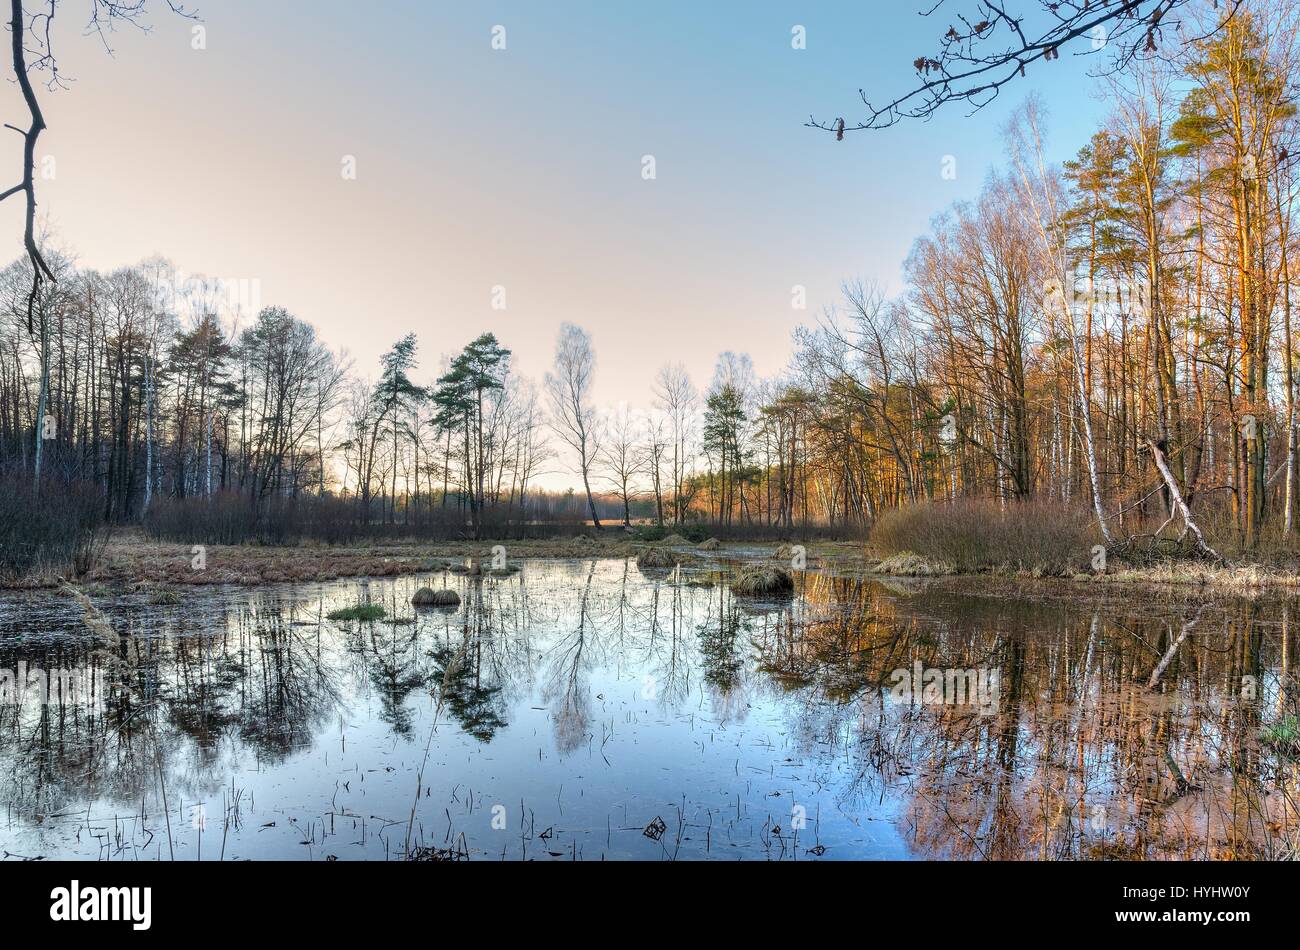 Spring nature landscape. Pond in the forest. Stock Photo